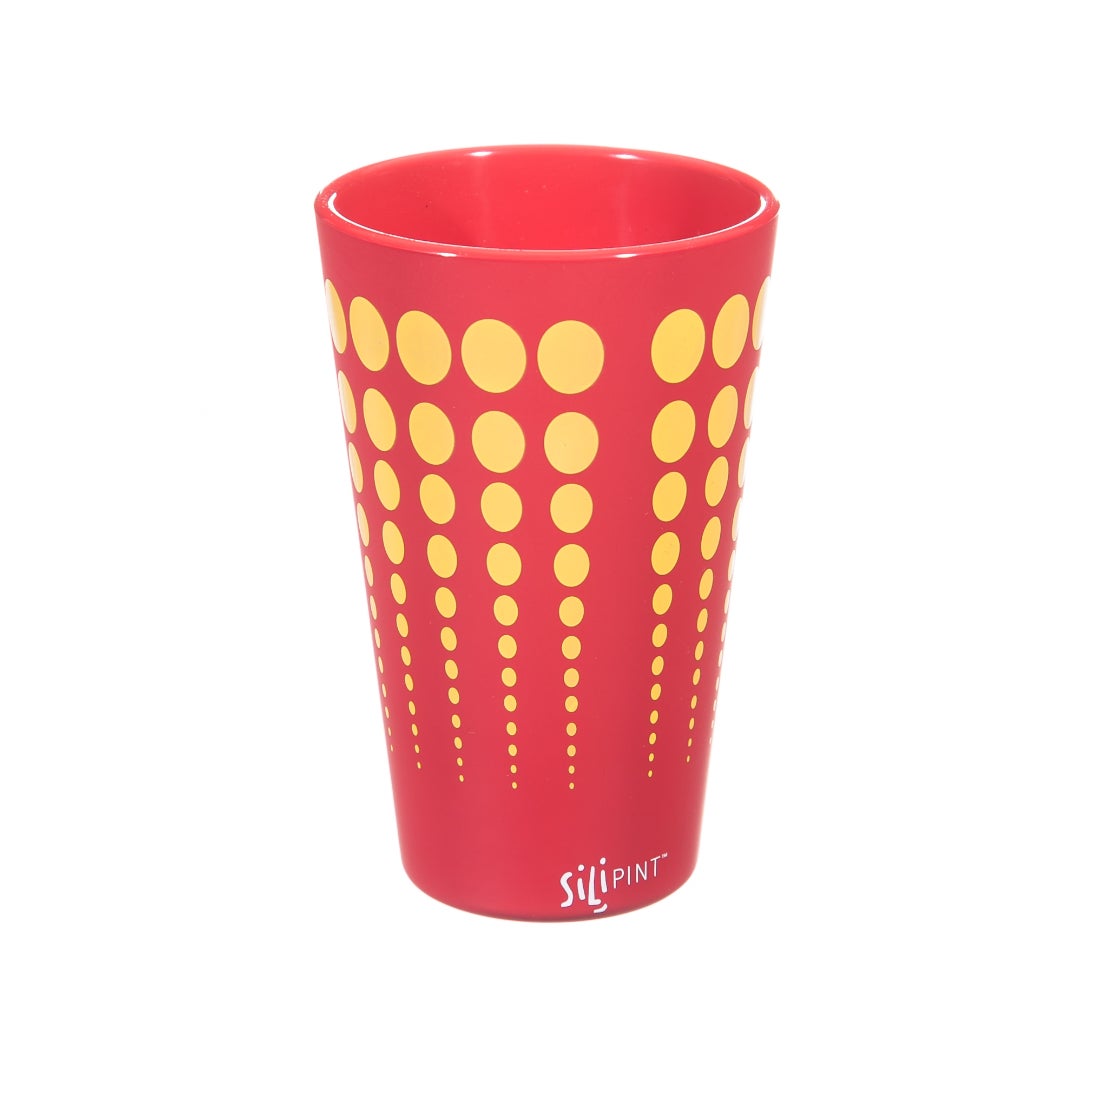 Cypress Home Burgundy with Yellow Dots Unbreakable Silicone Pint Glass, 16 ounces